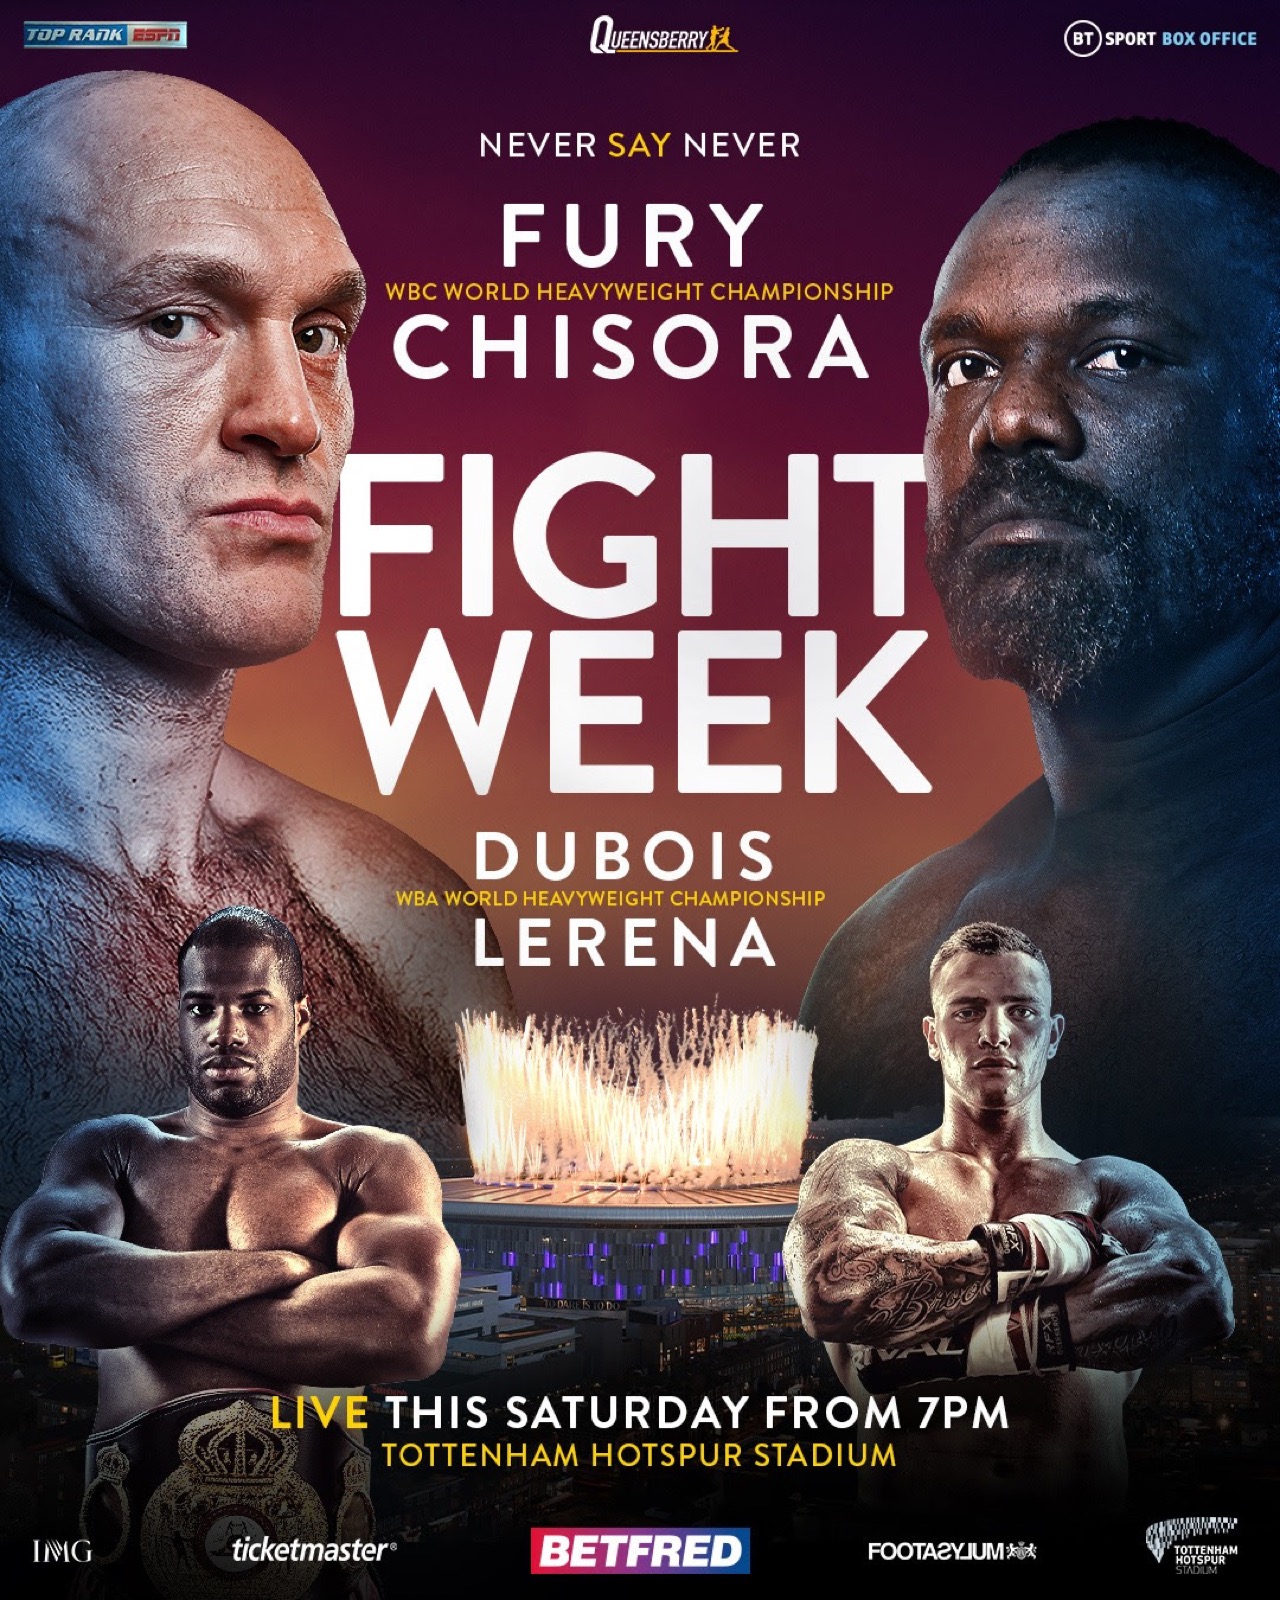 Fury - Chisora 3: Full Schedule & Card, Fight Time